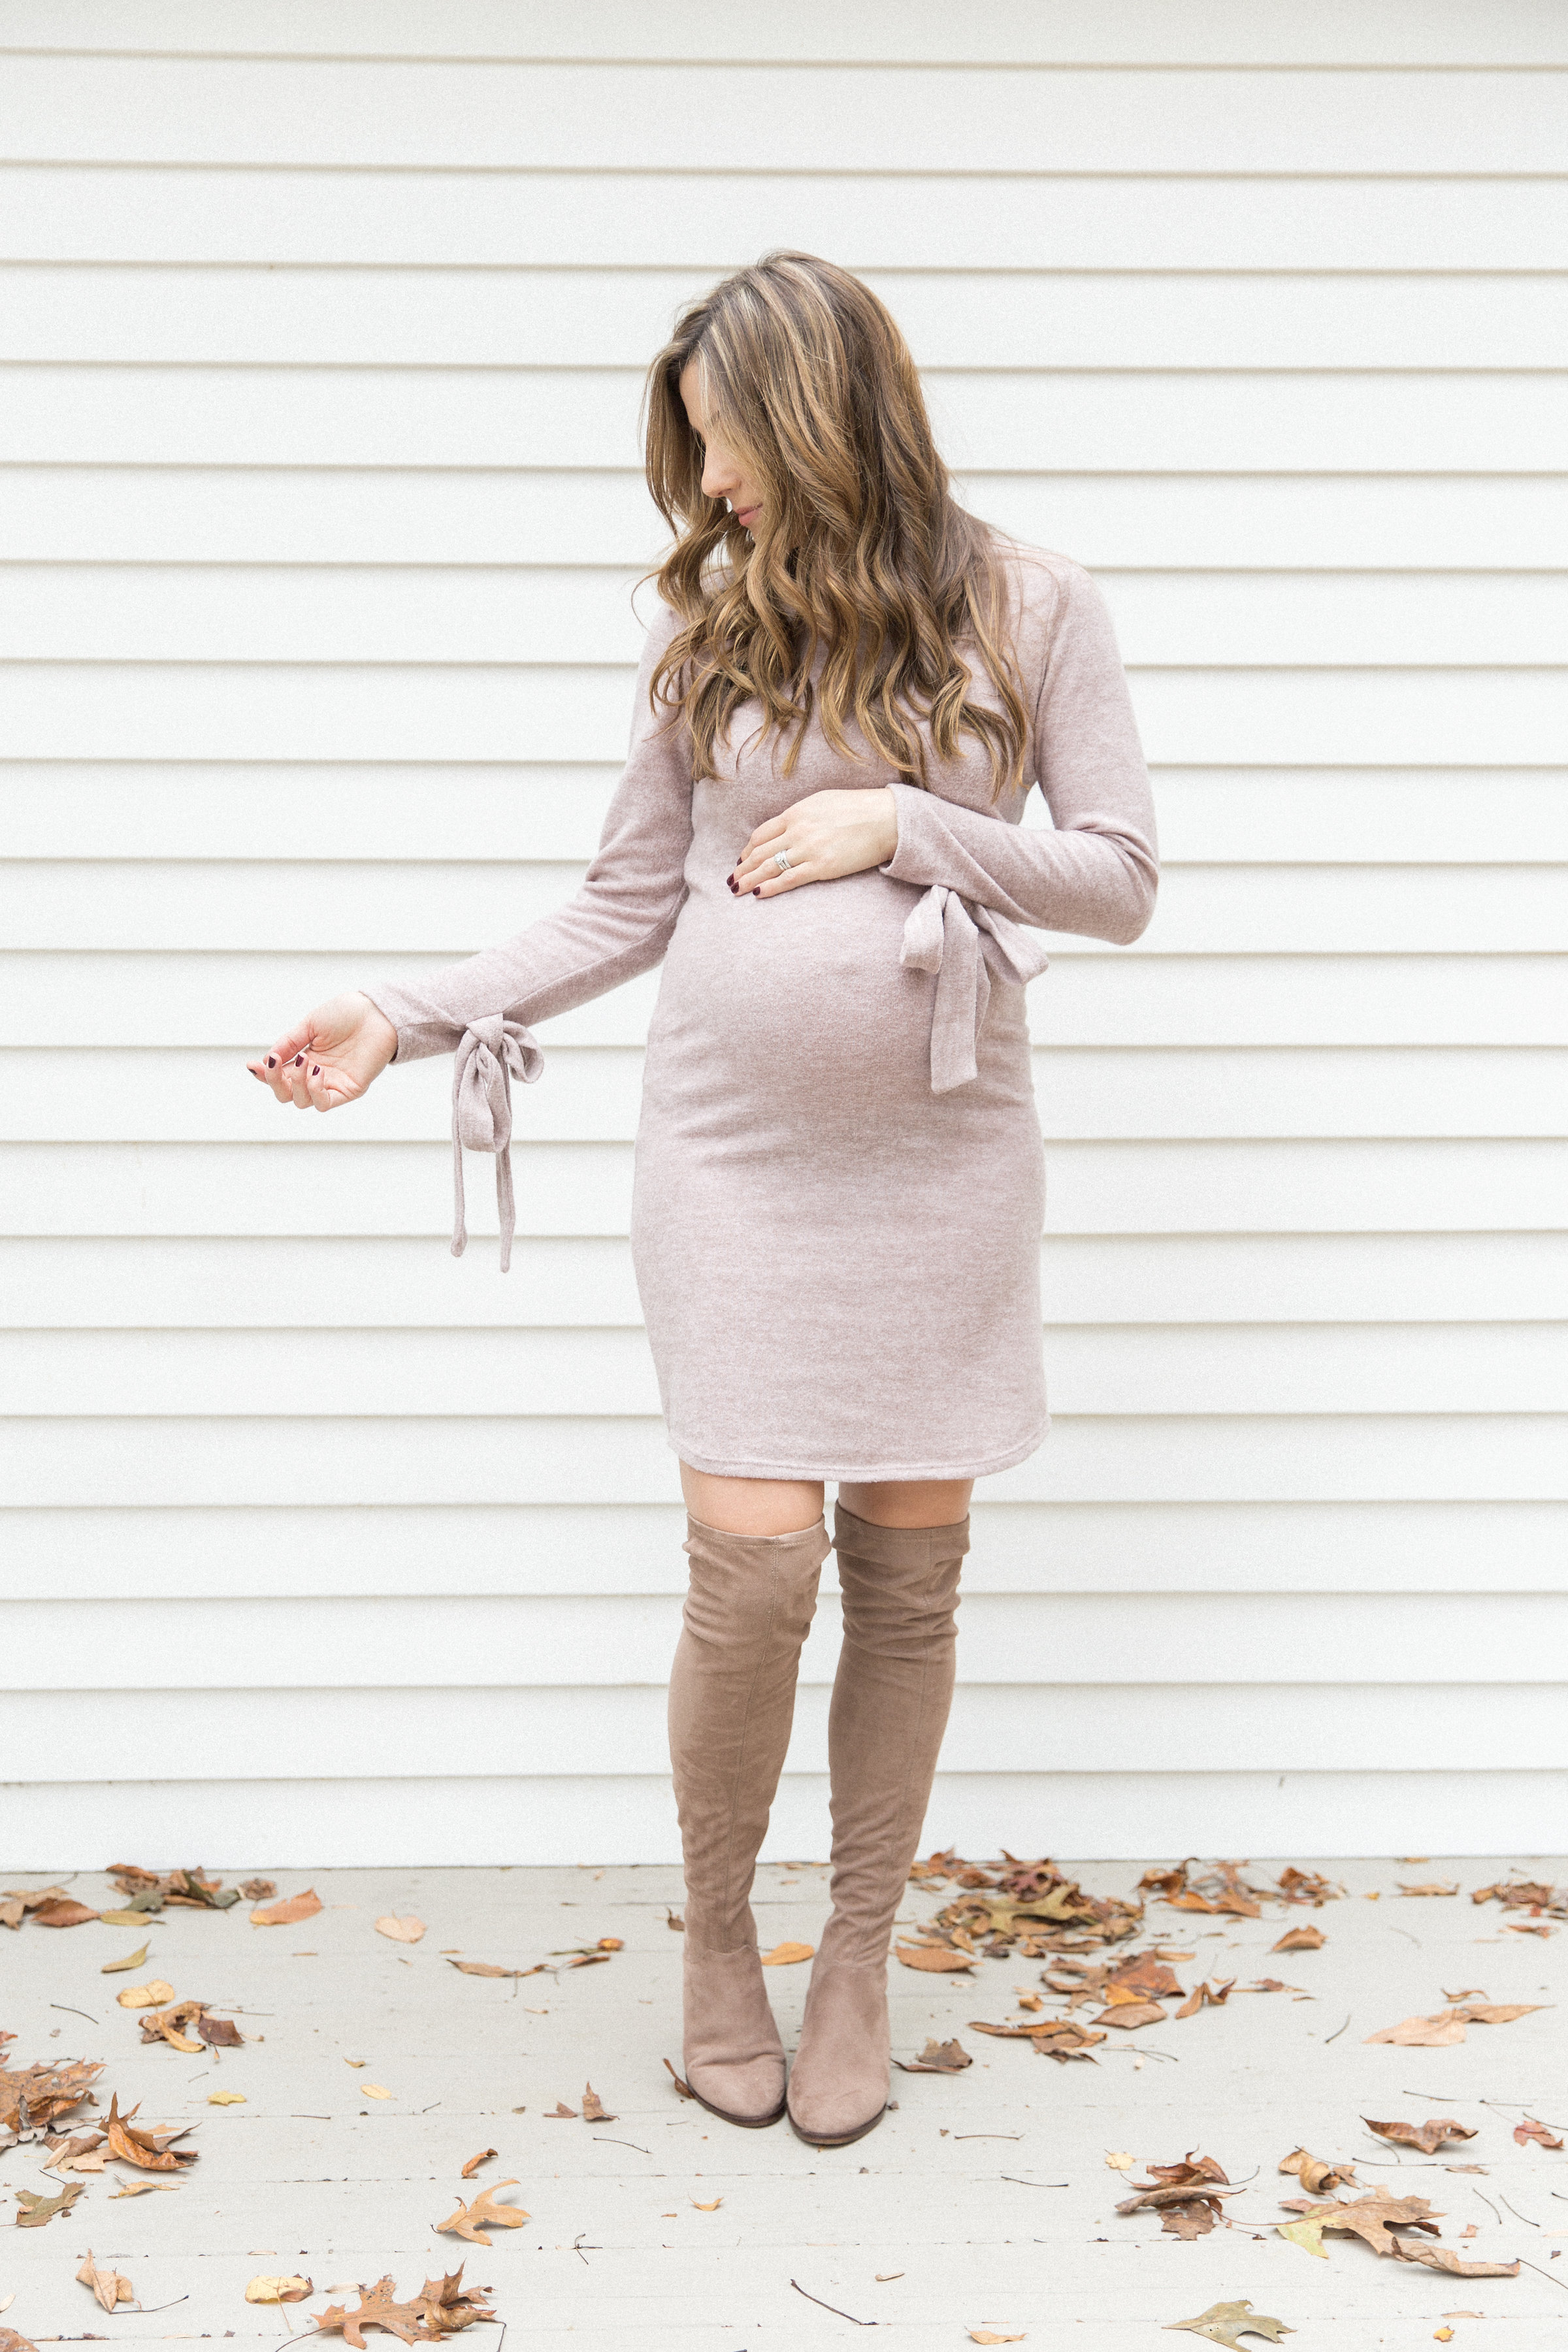 Life and style blogger Lauren McBride shares Special Occasion Maternity Dresses for family photos, baby showers, and maternity photo shoots!